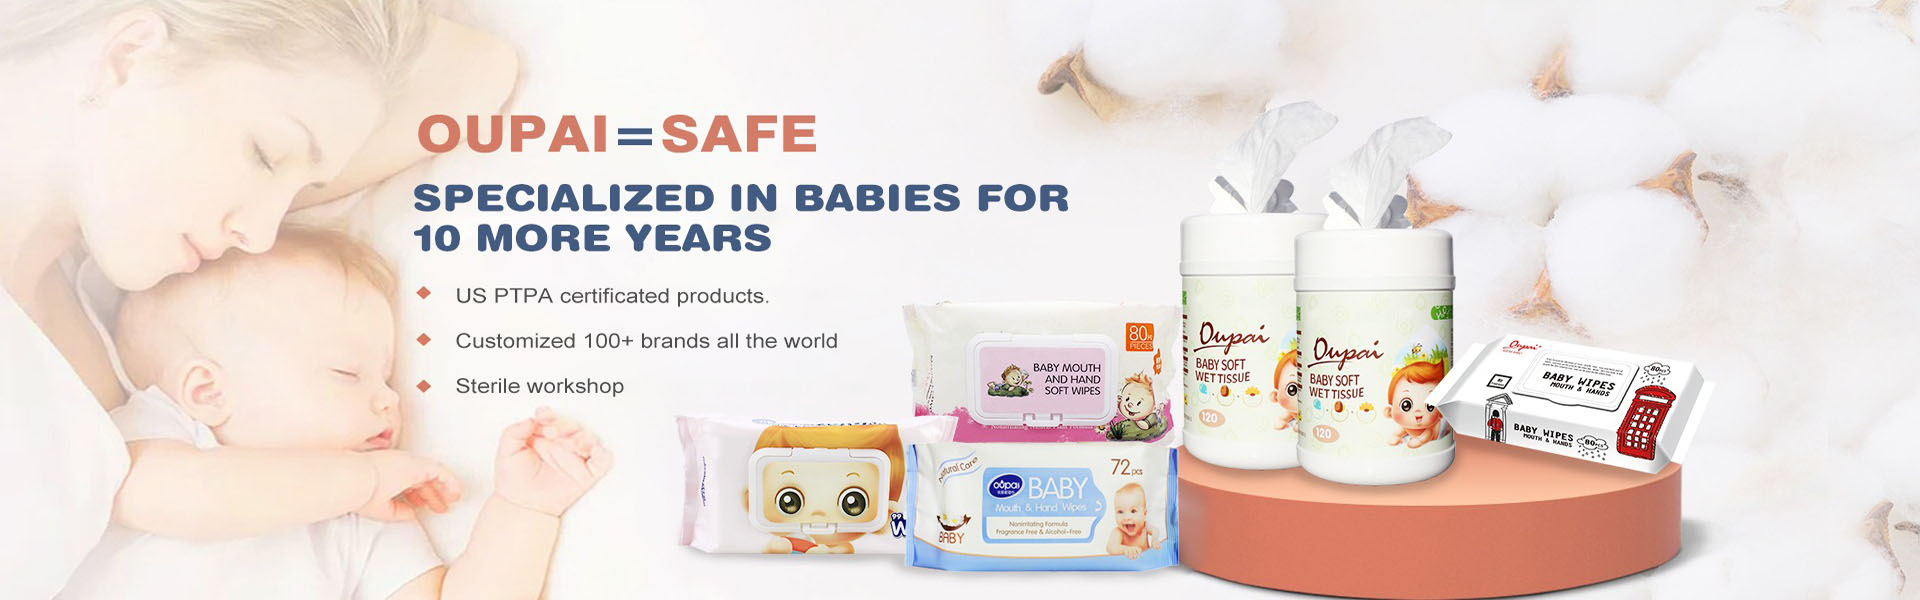 Wipes, lingettes sanitaires, masque,Wuhan Innovation Oupai Technology Co., Ltd.